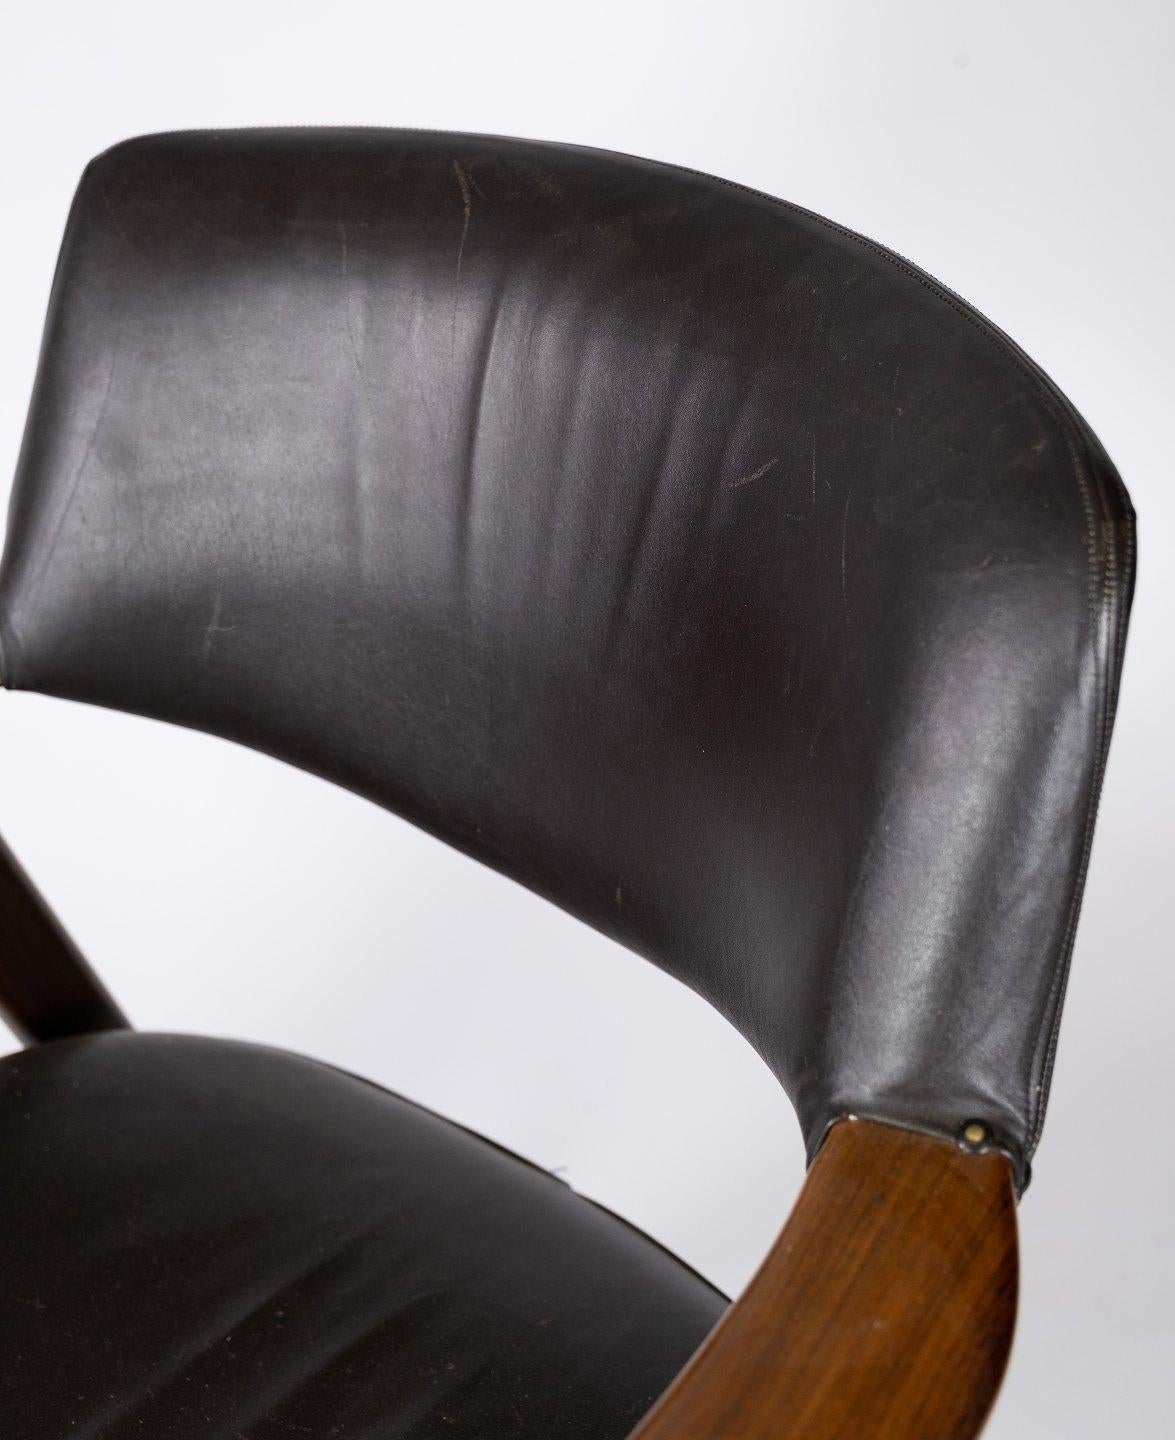 Scandinavian Modern Armchair in Rosewood and Black Leather of Danish Design from 1976